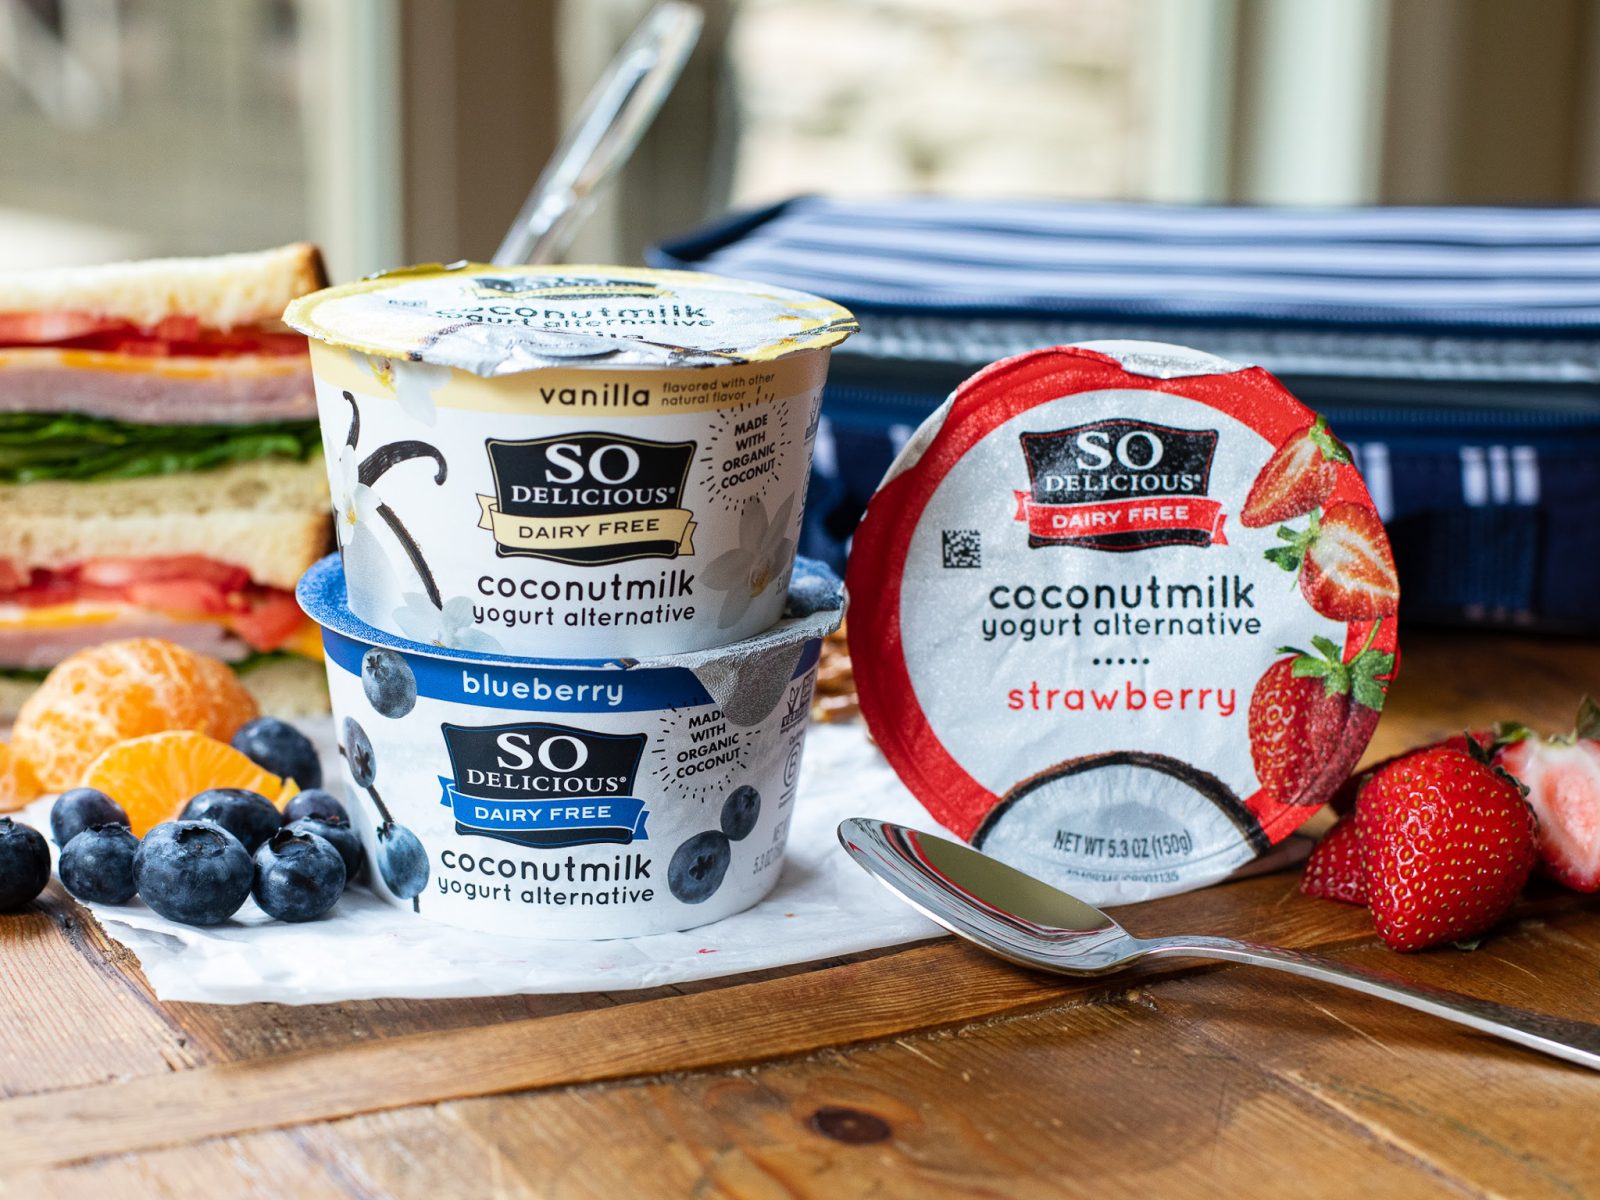 Save $3 On Silk & So Delicious Products At Publix